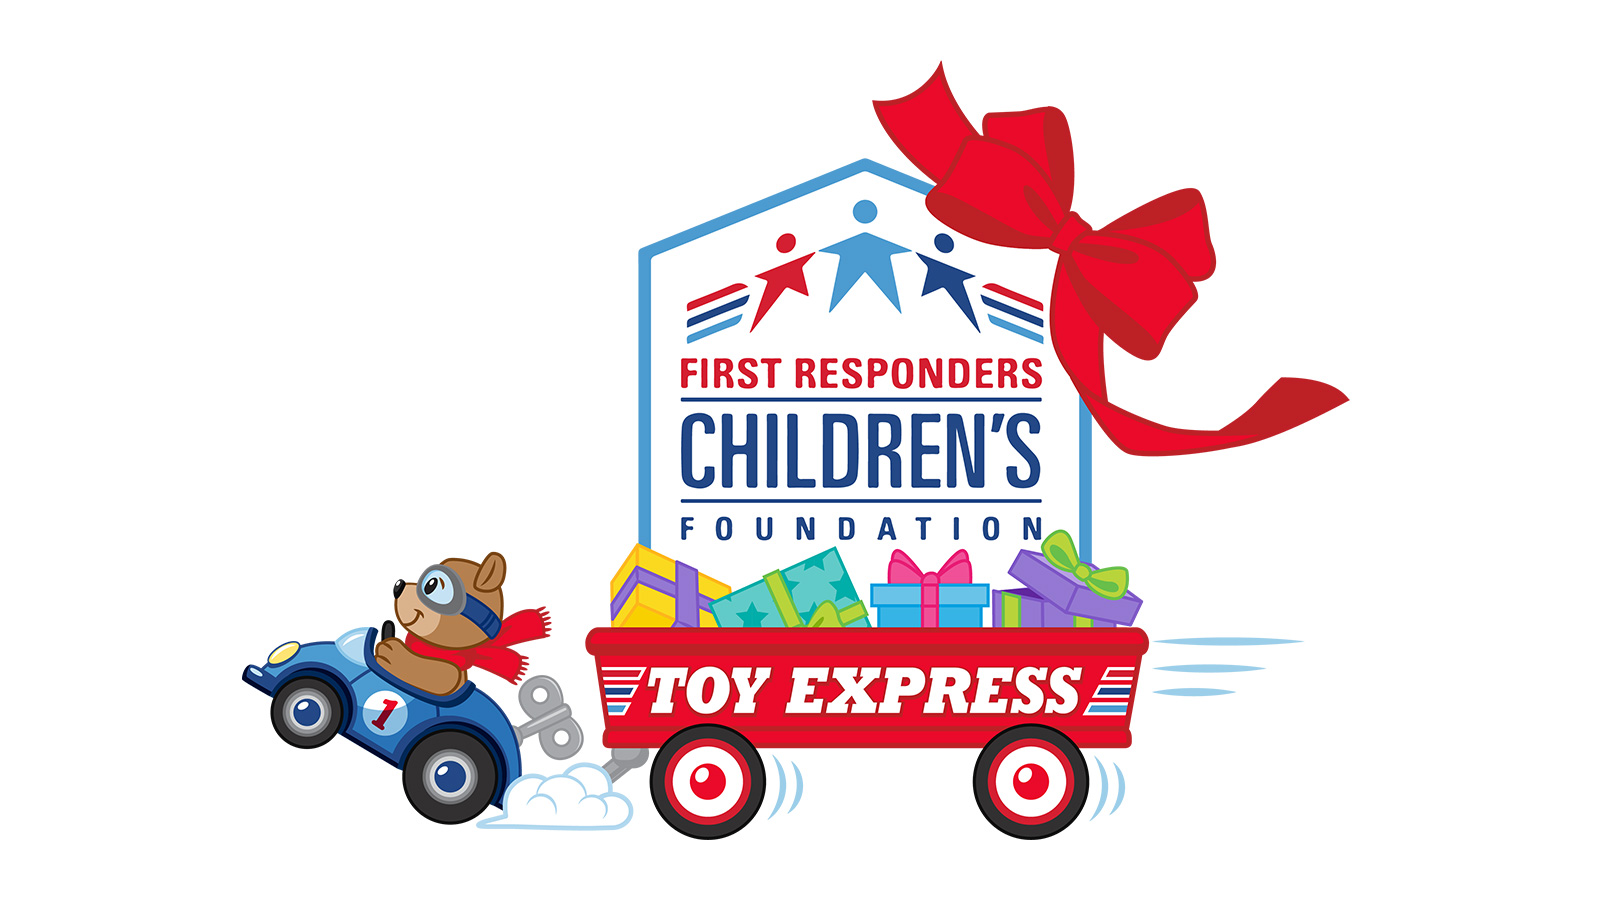 2022 ‘Toy Express’ Launched by First Responders Children’s Foundation